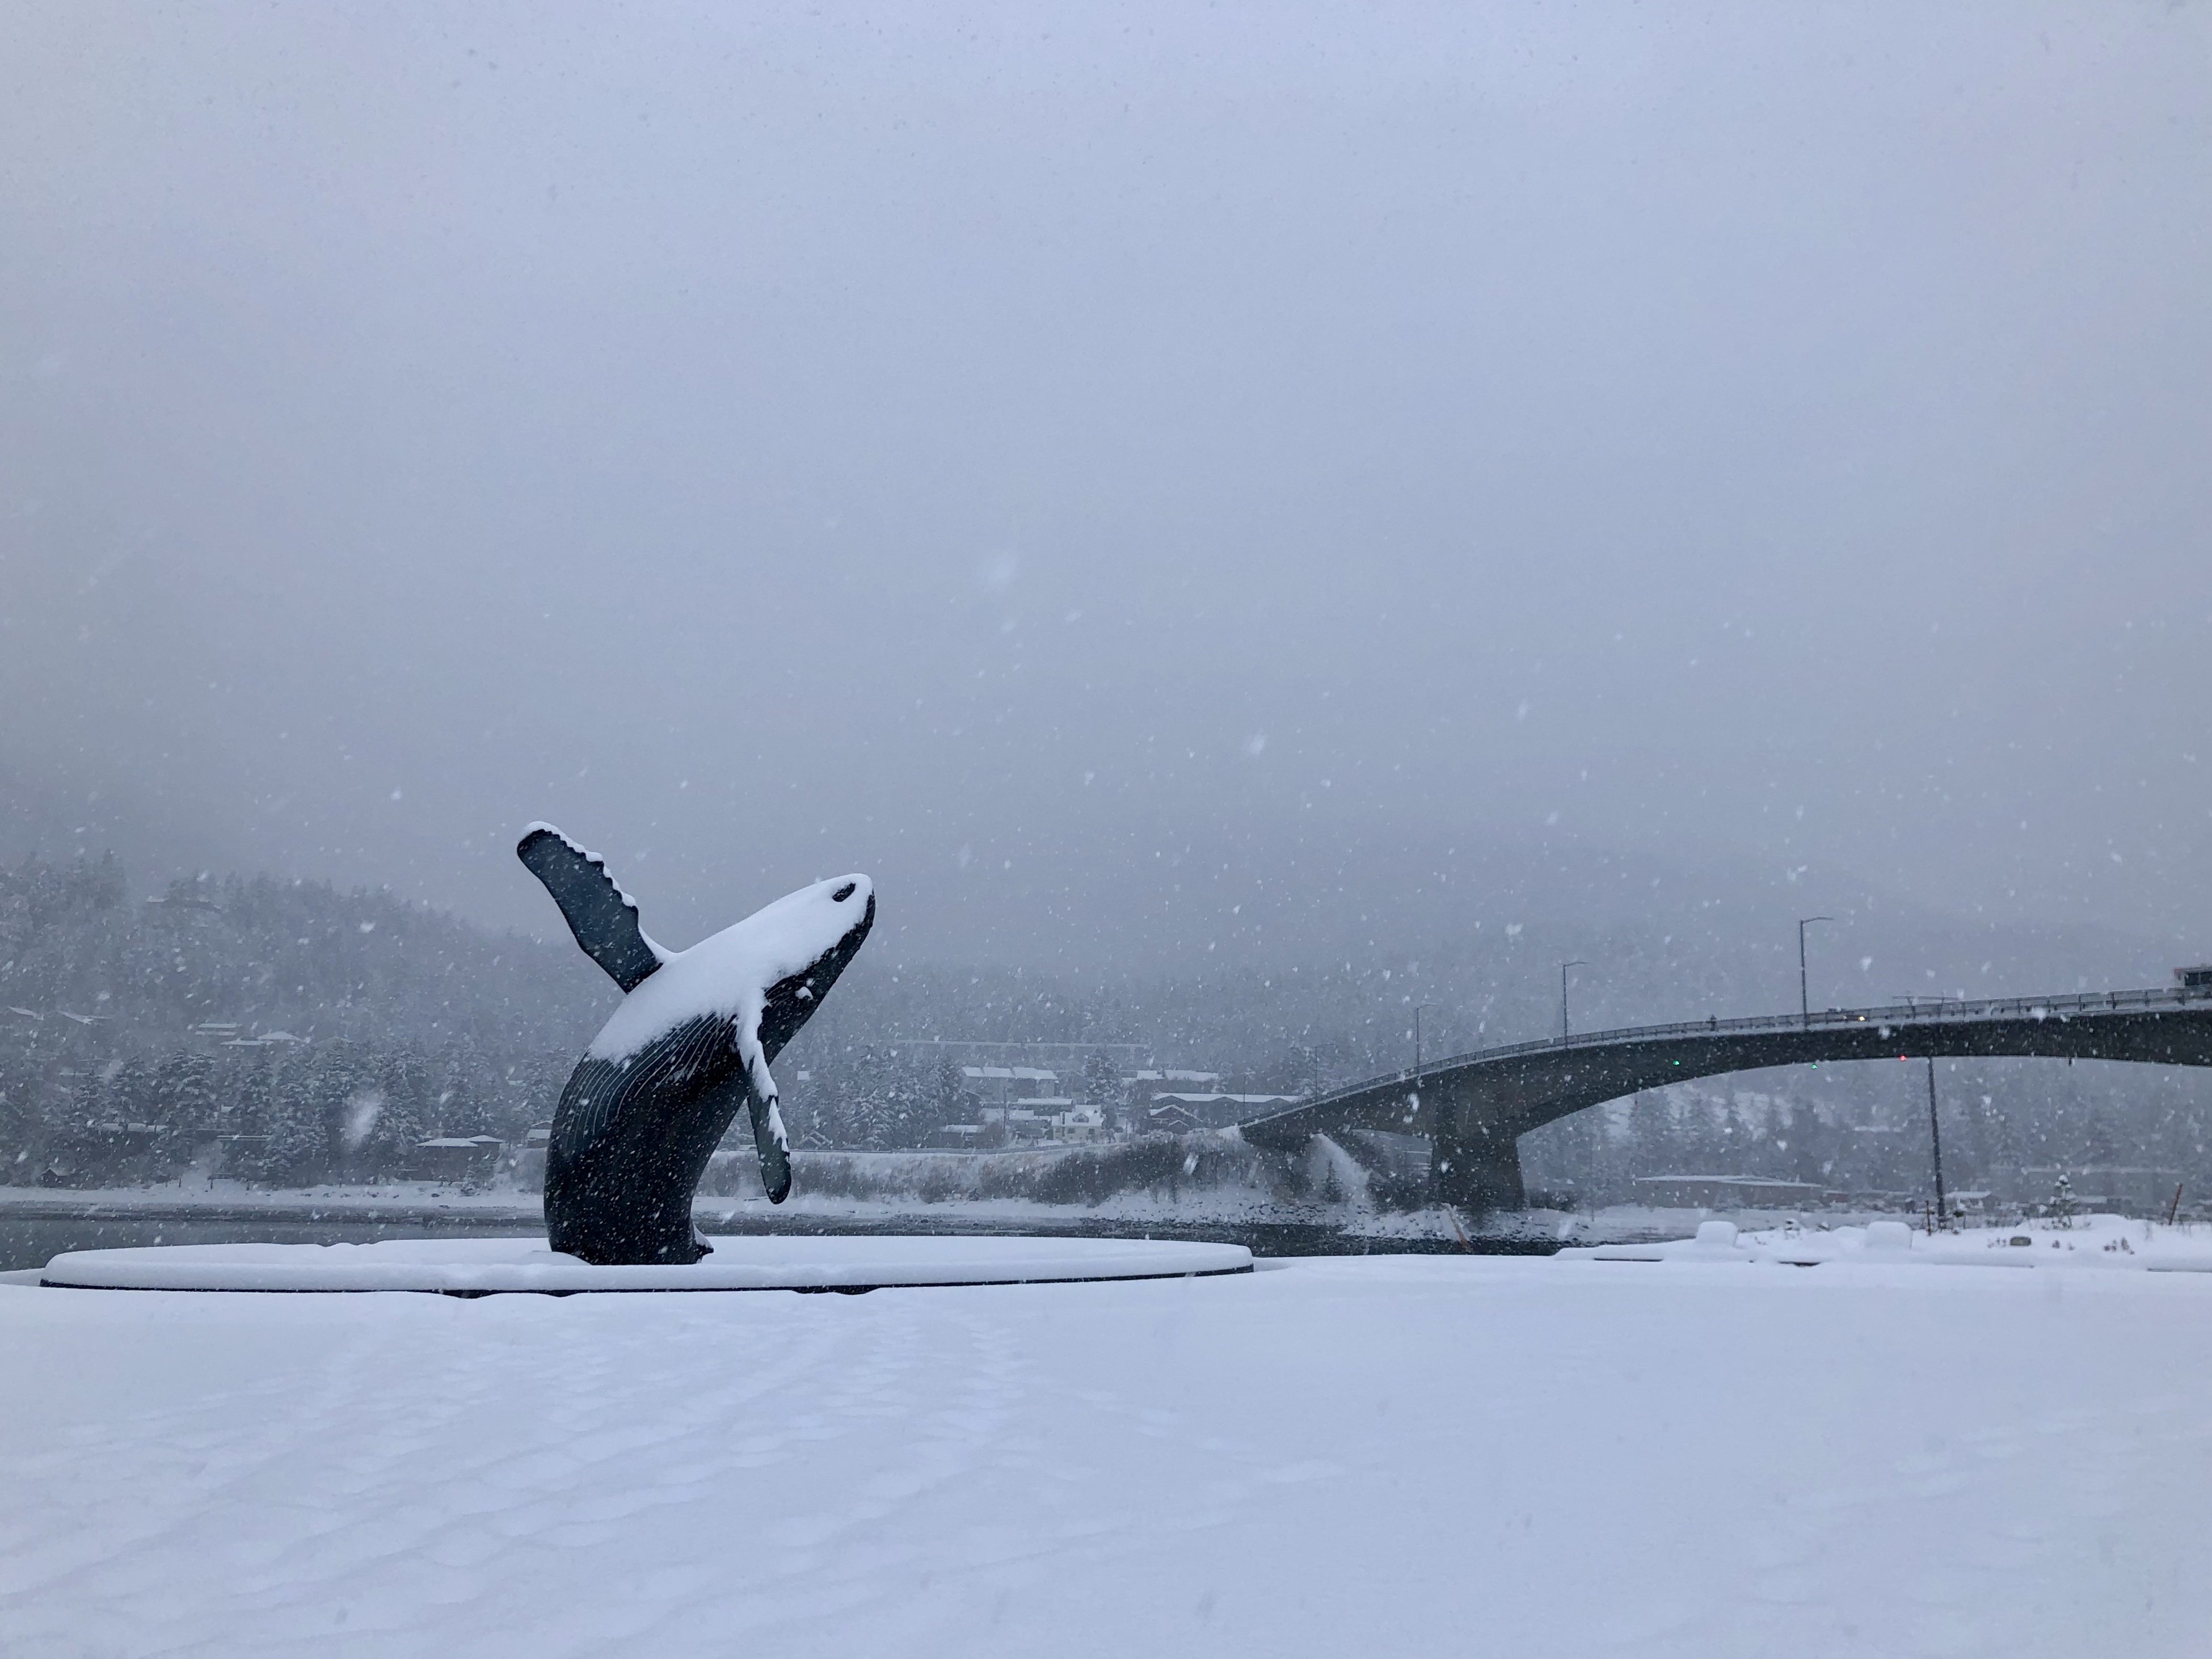 The whale statue covered in snow on an overcast day.